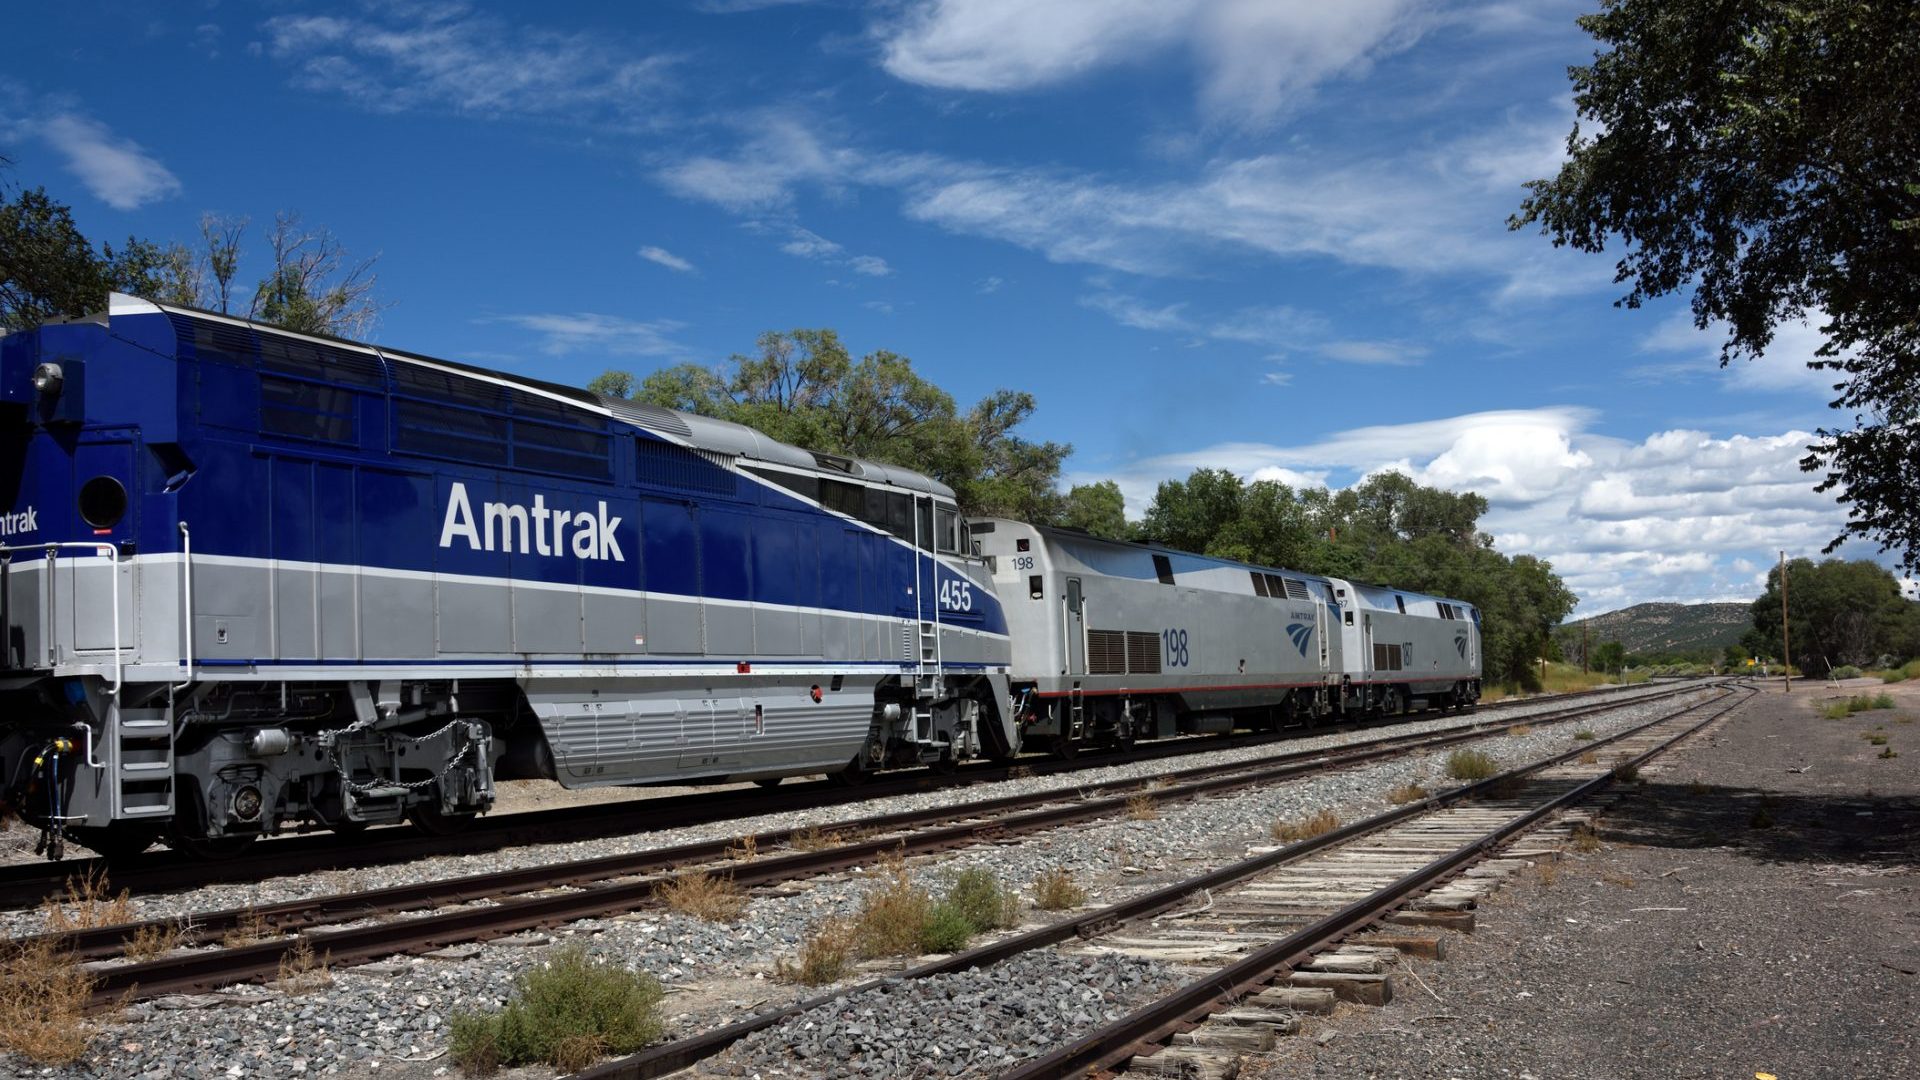 <p><span>It was announced back in February that Amtrak was spending $3 million on cash bonuses for employees who got vaccinated. Workers who provide proof of vaccination will also earn a bonus of two hours pay. </span></p> <p><span>Amtrak is also offering employees the opportunity to receive the shot during work and will give paid time off, up to two full days, for those who have side effects from the vaccine.</span></p> <p><strong><em>See: <a href="https://www.gobankingrates.com/saving-money/travel/21-mistakes-can-blow-your-budget-while-traveling/?utm_campaign=1103839&utm_source=msn.com&utm_content=19&utm_medium=rss">21 Mistakes That Can Blow Your Budget While Traveling</a></em></strong></p>